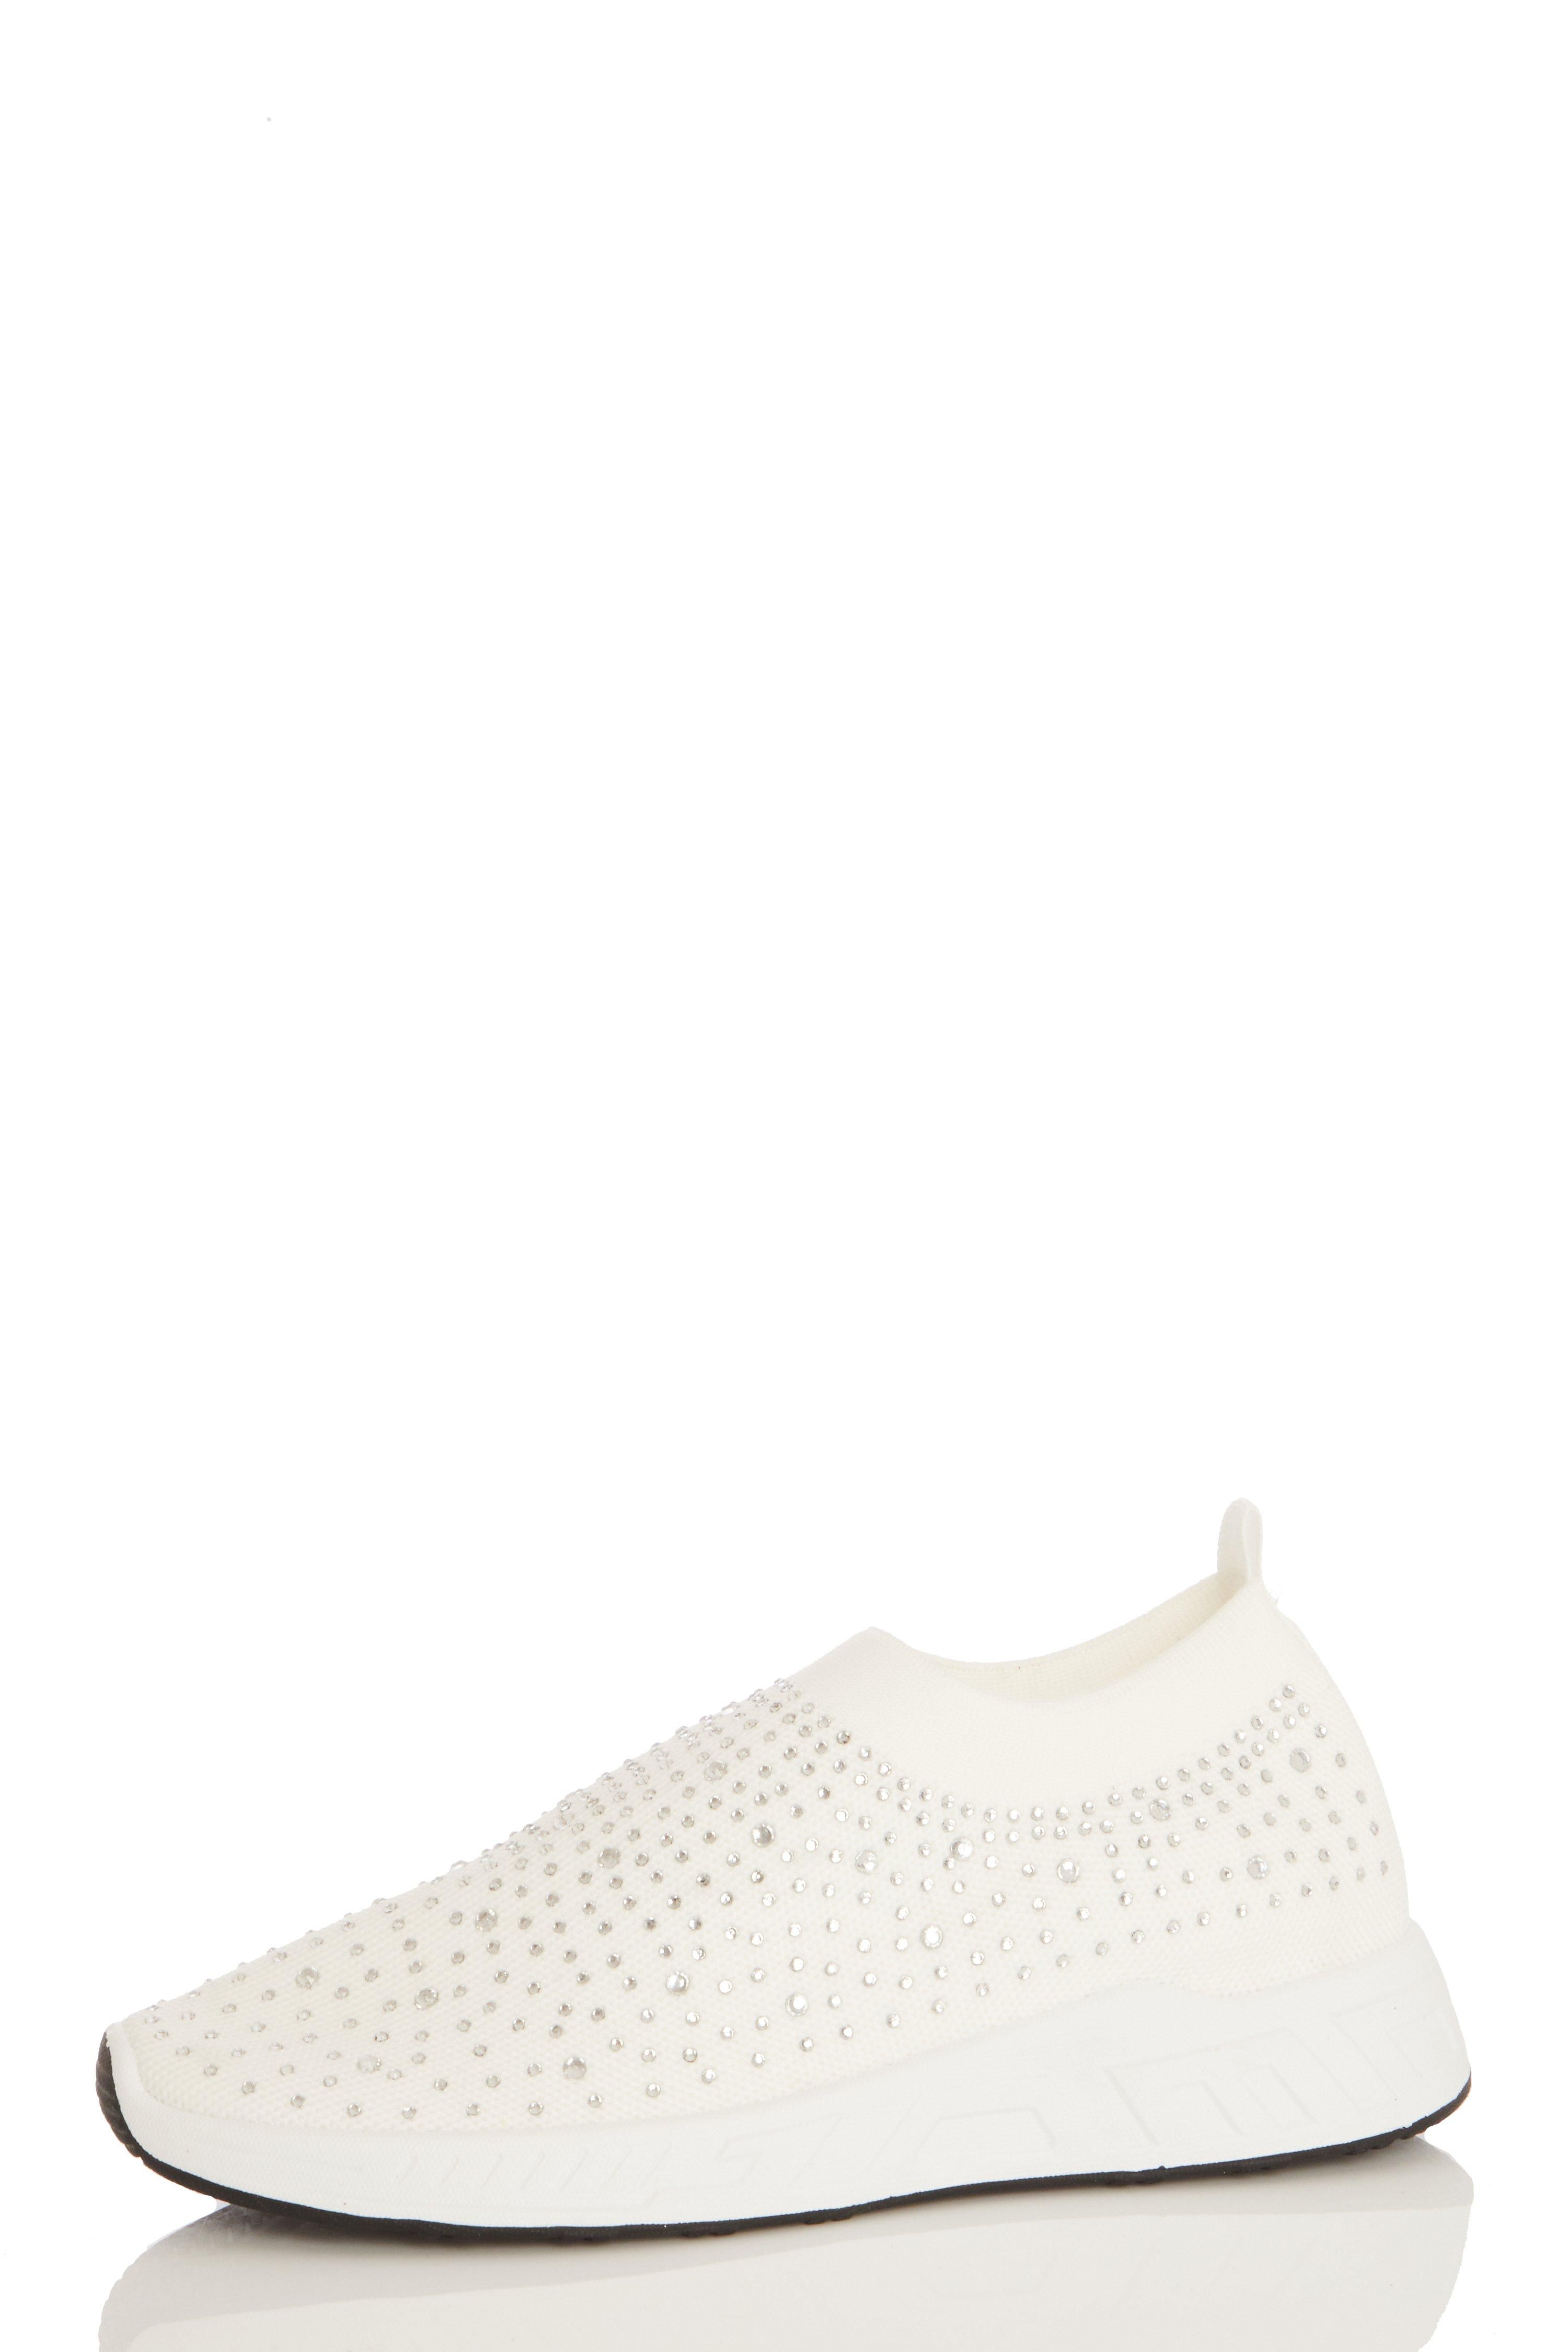 - Casual trainers  - Slip on style  - Knit finish  - Diamante embellished